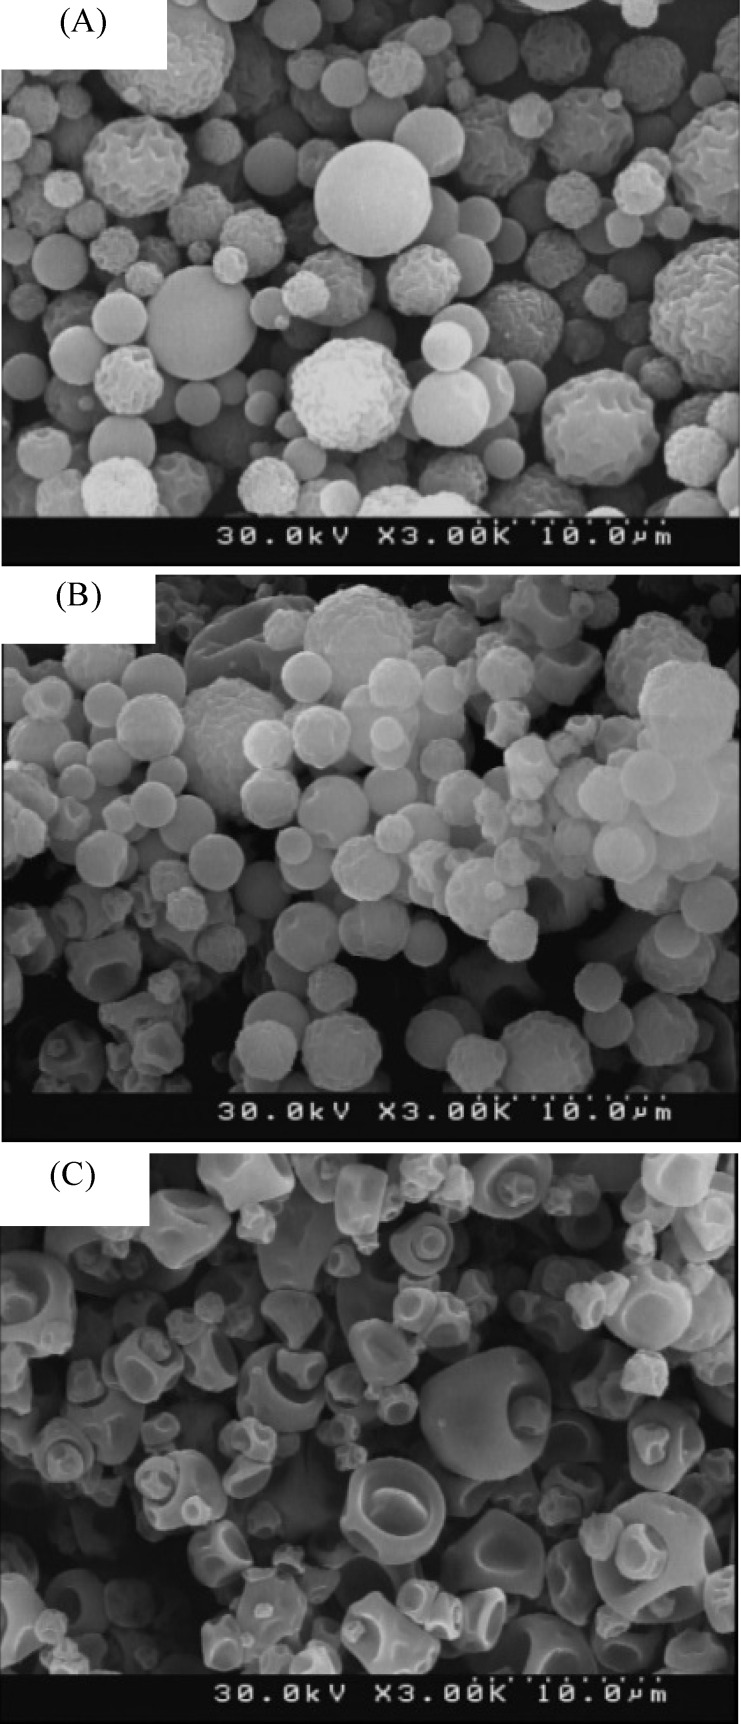 FESEM images of the microparticles for (A) group 1, (B) group 2 and (C) group 3.